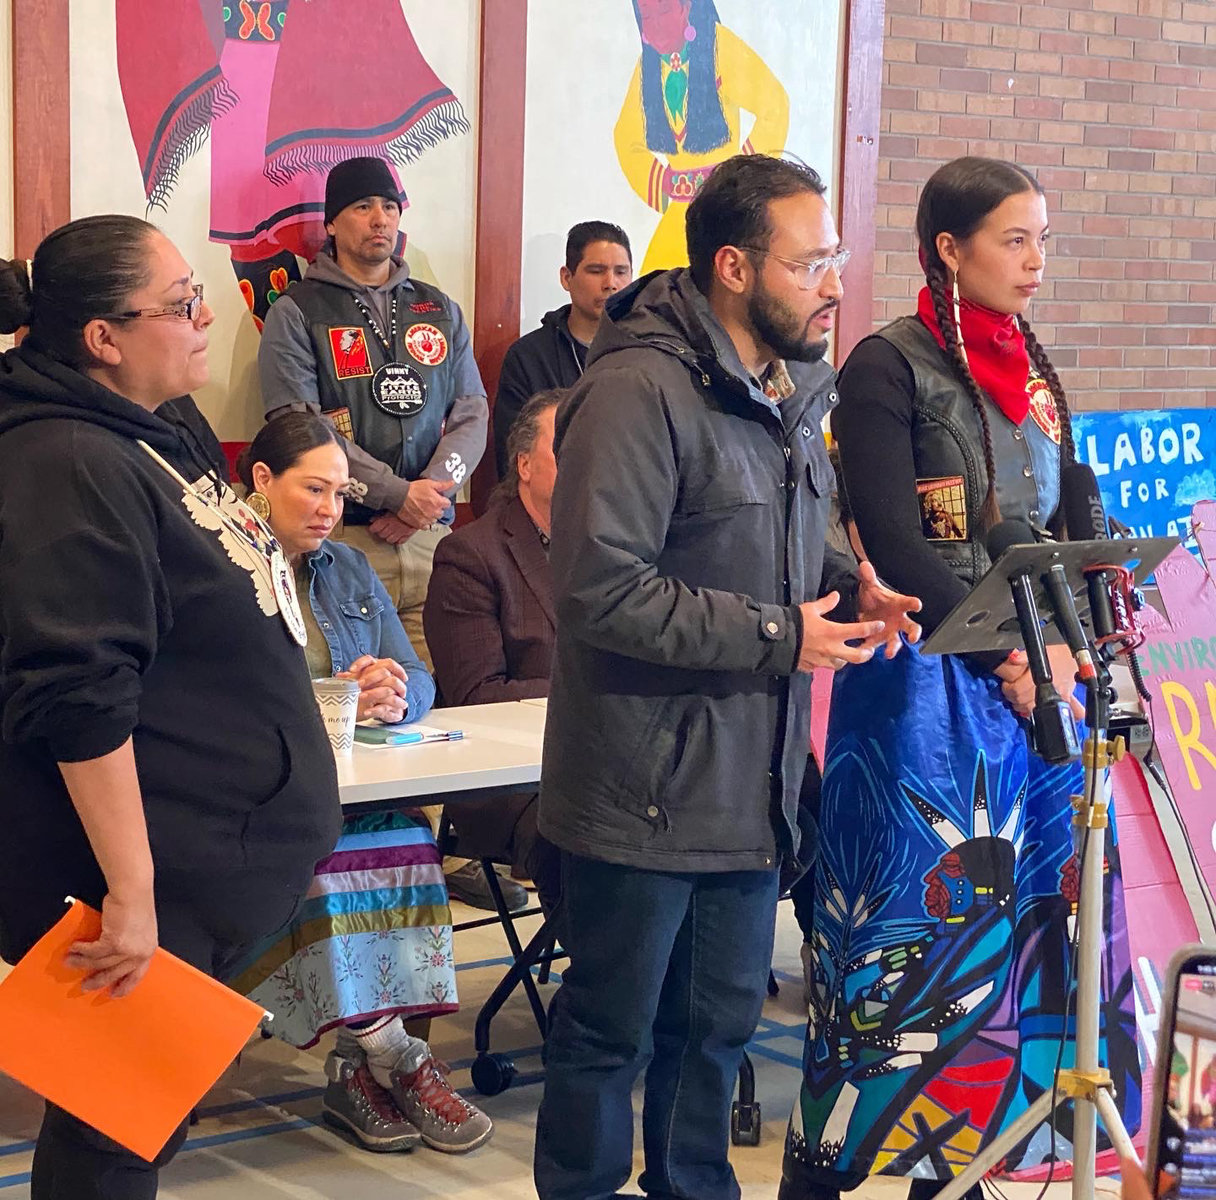 Cassandra Holmes (left), Joe Vital and Rachel Thunder speak at a press conference held on Wednesday, Feb. 22, 2023 at the Minnesota Indian Women’s Resource Center by Indigenous tribal members opposed to the demolition of the Roof Depot site for the city's public works site expansion. The 7.5-acre property is owned by the city, but the community's vision for the site includes an indoor urban farm. They were working to purchase the property in 2015 when the city threatened eminent domain and purchased it at a higher cost. (Photo by Tesha M. Christensen)